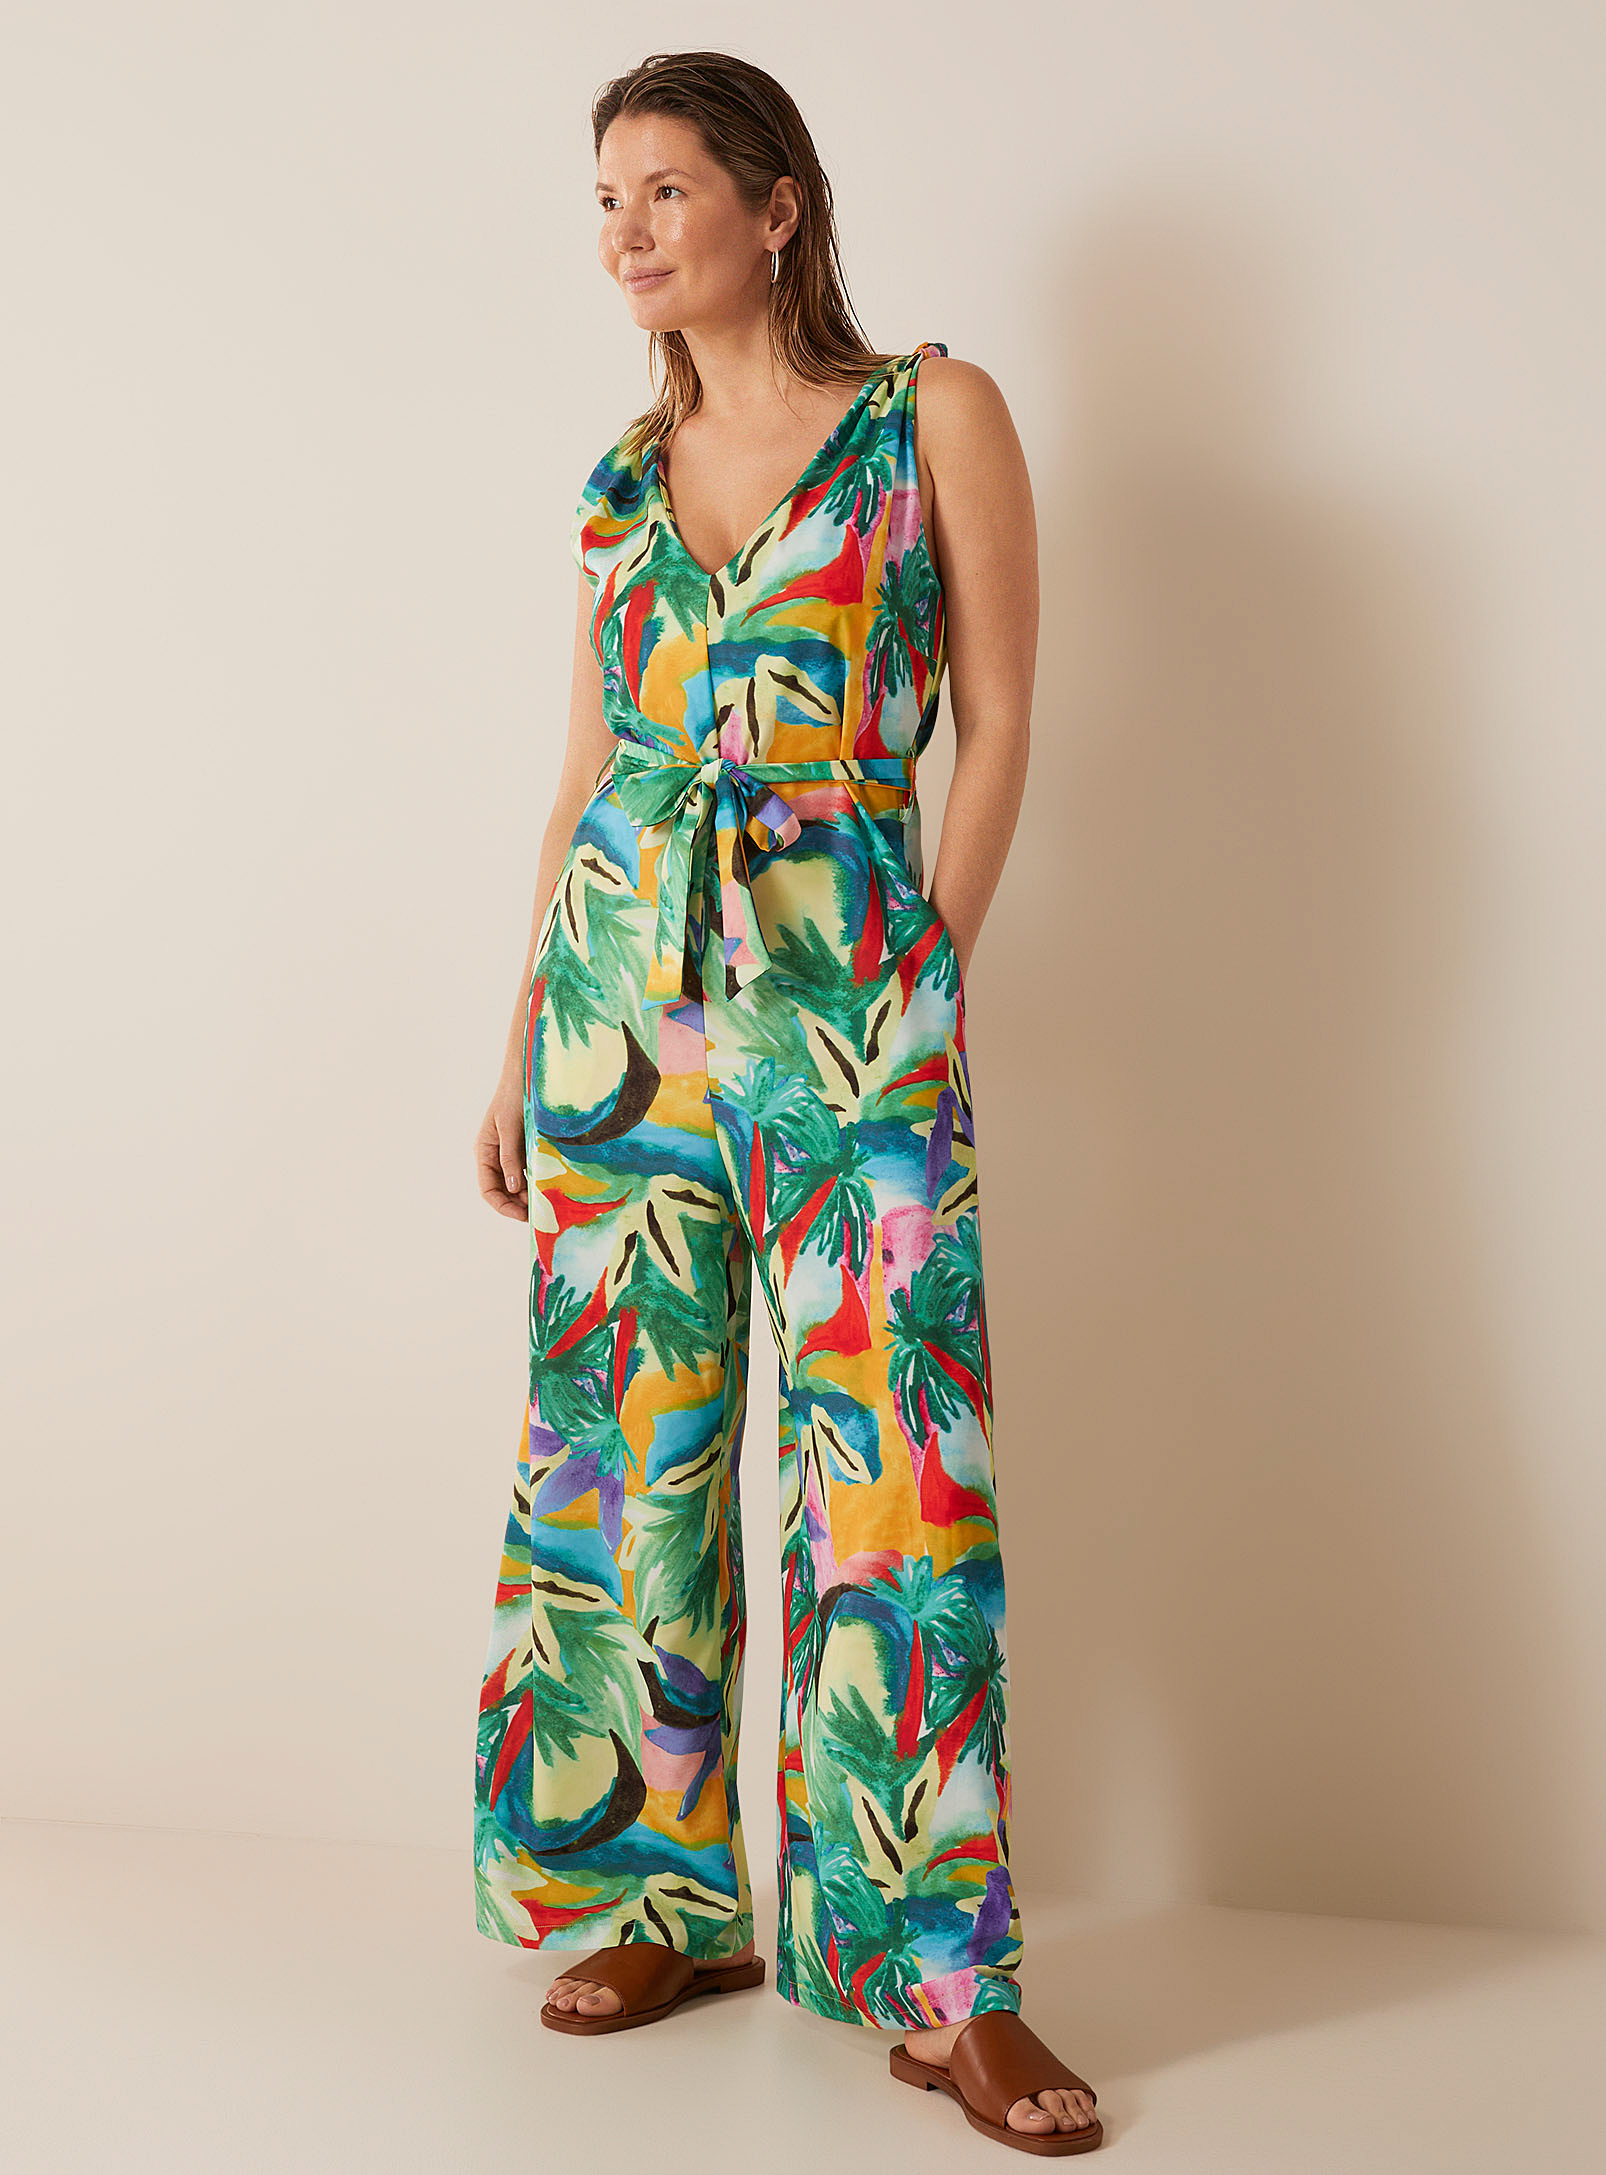 Byron Bay Knotted Strap Beach Jumpsuit In Assorted